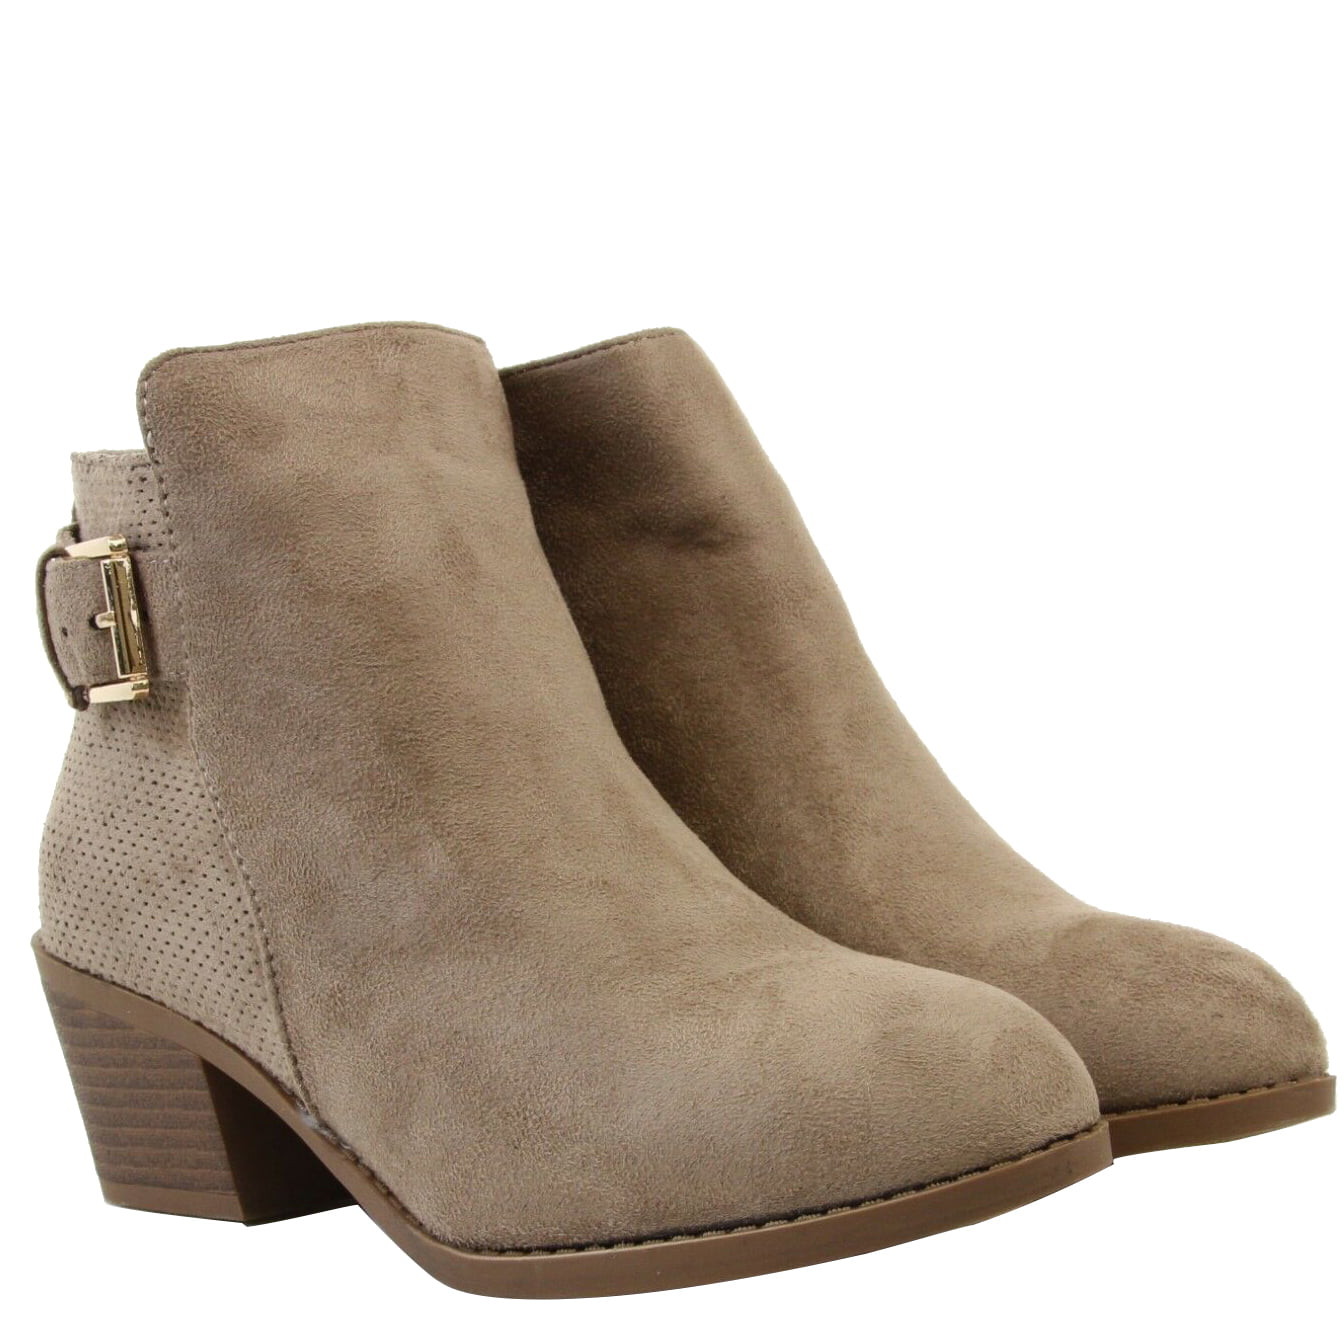 womens khaki low heel ankle boots with zip fastening in PU and faux suede 